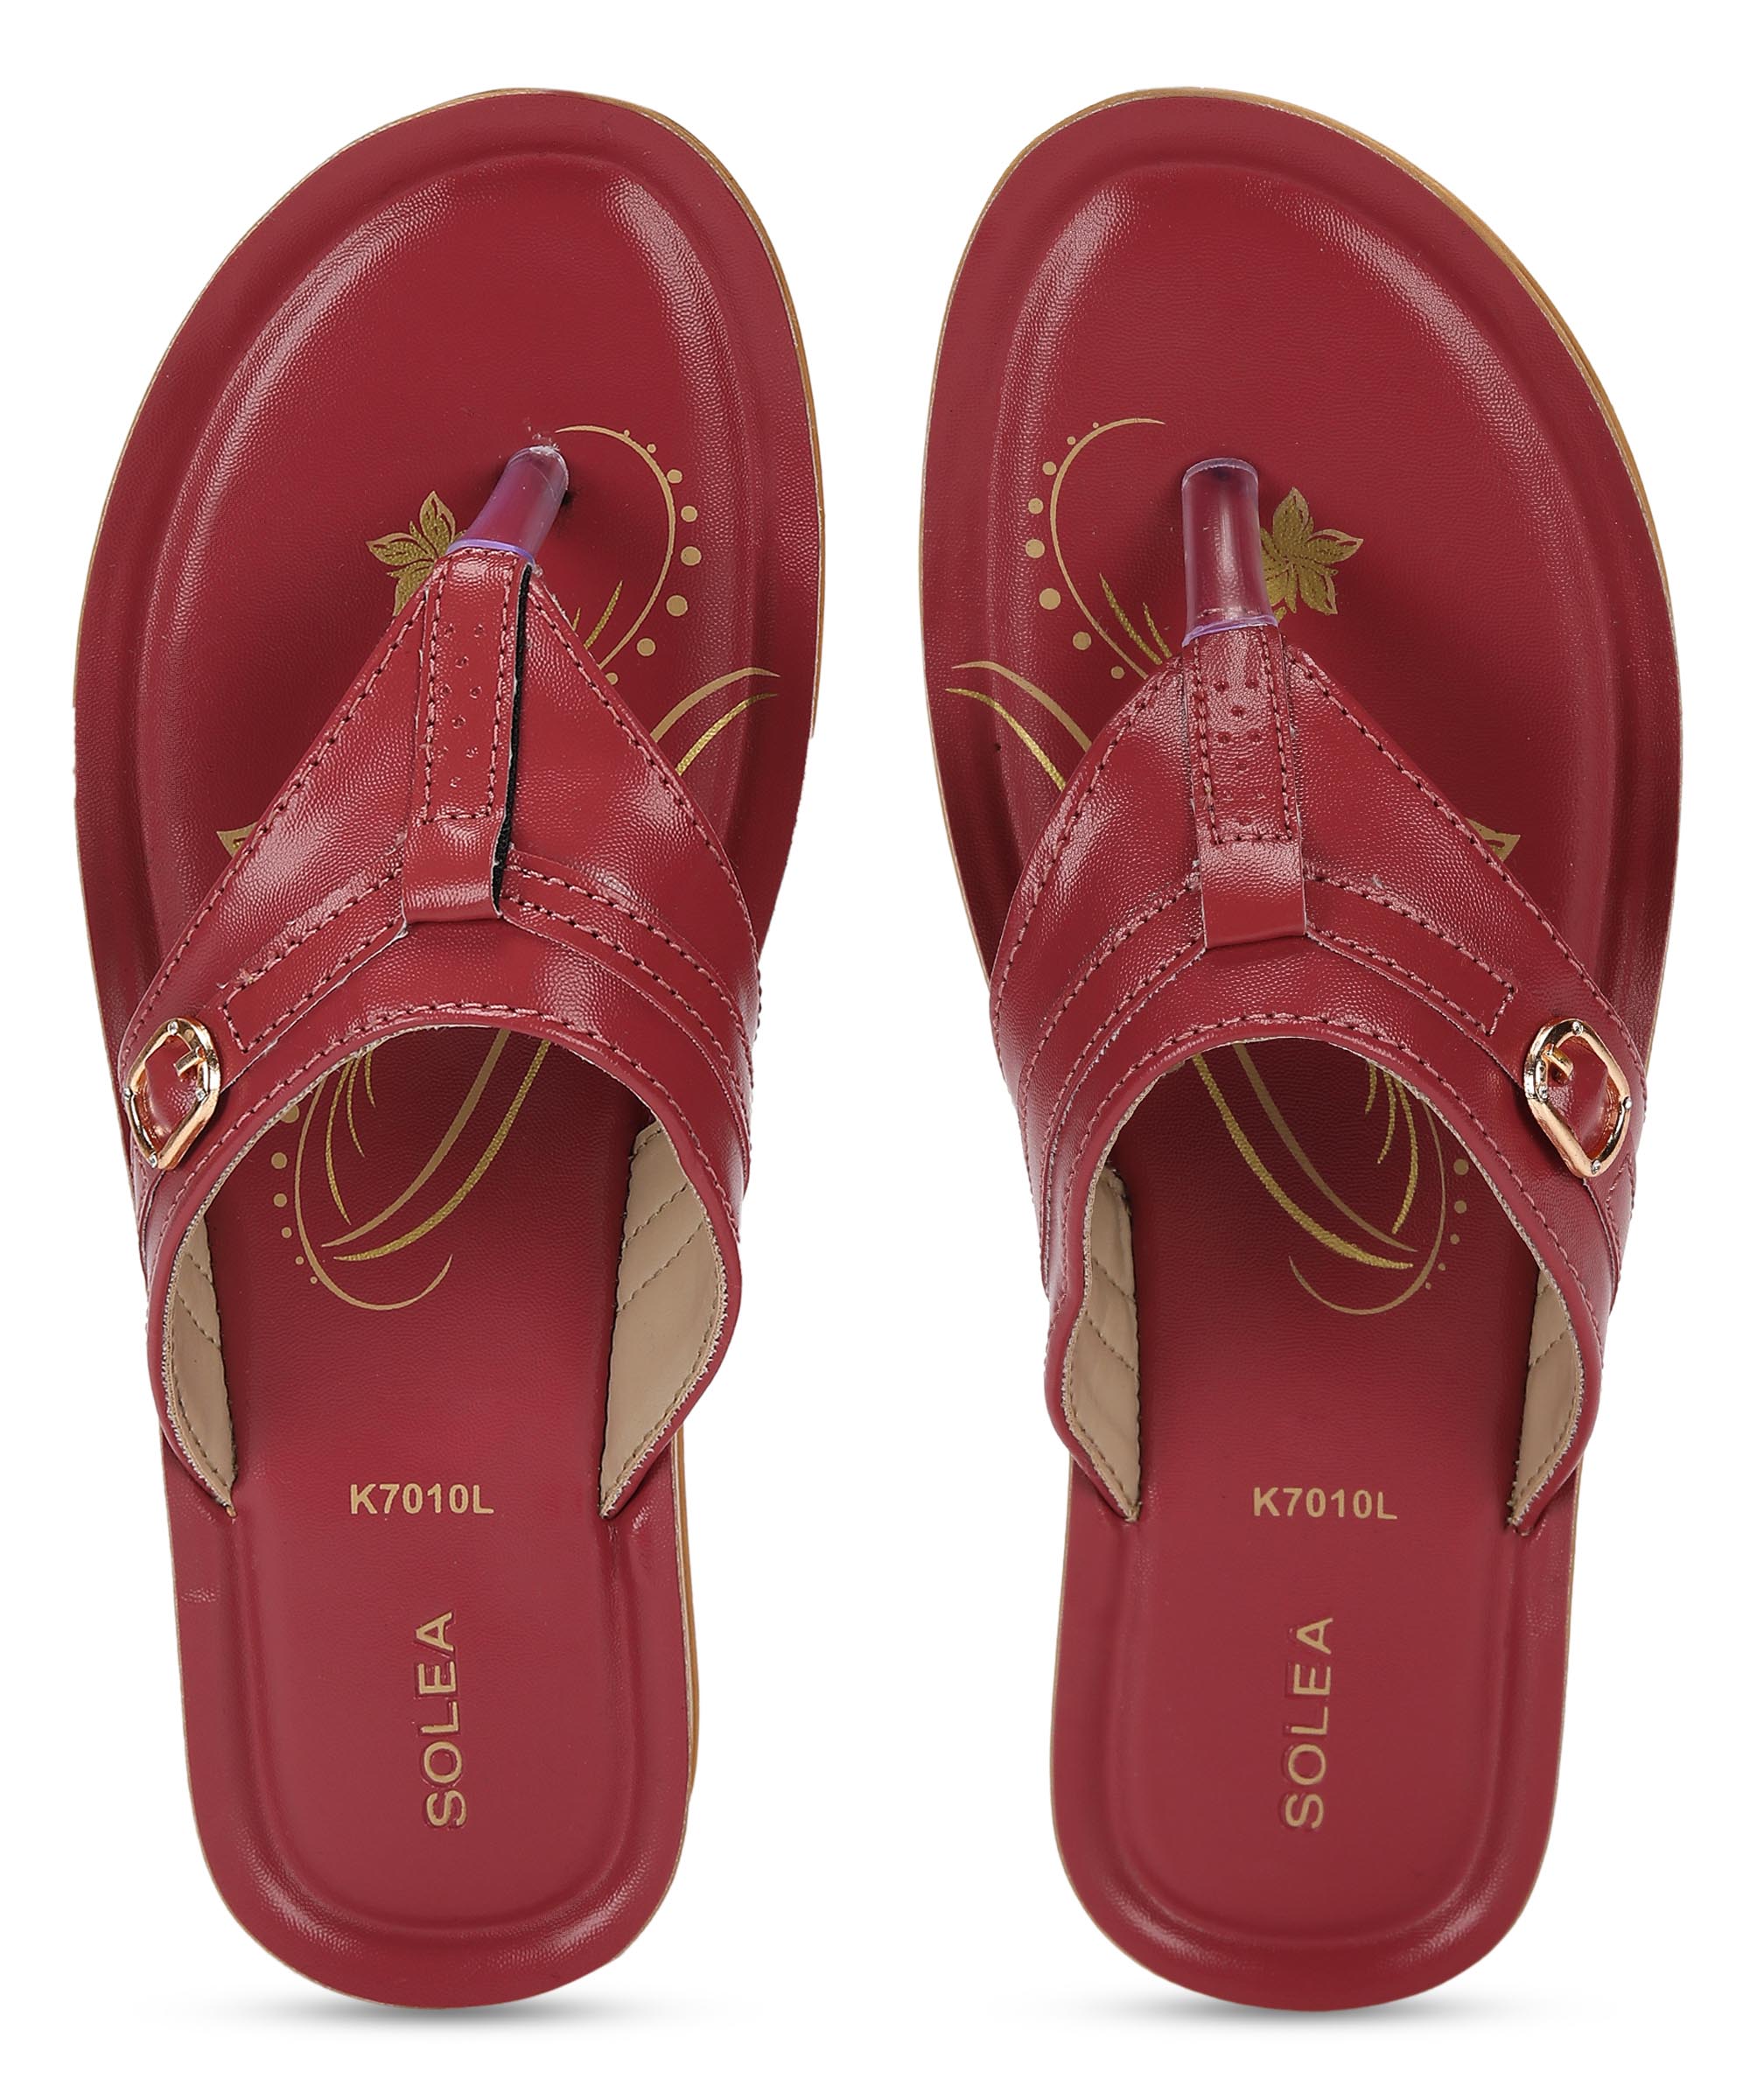 Paragon PUK7010L Women Sandals | Casual &amp; Formal Sandals | Stylish, Comfortable &amp; Durable | For Daily &amp; Occasion Wear